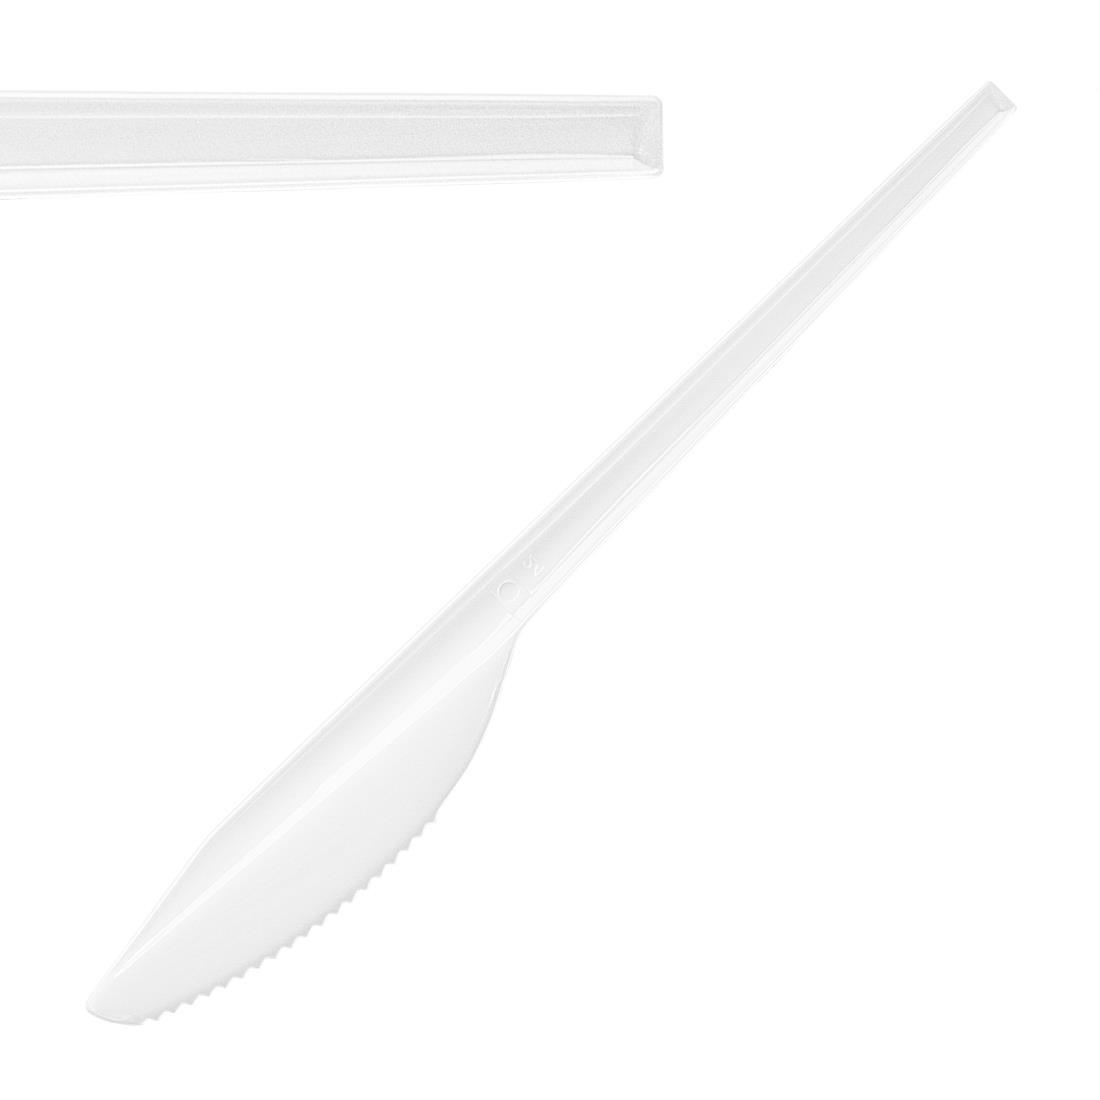 Fiesta Recyclable Plastic Knives White (Pack of 100) - U642  - 3